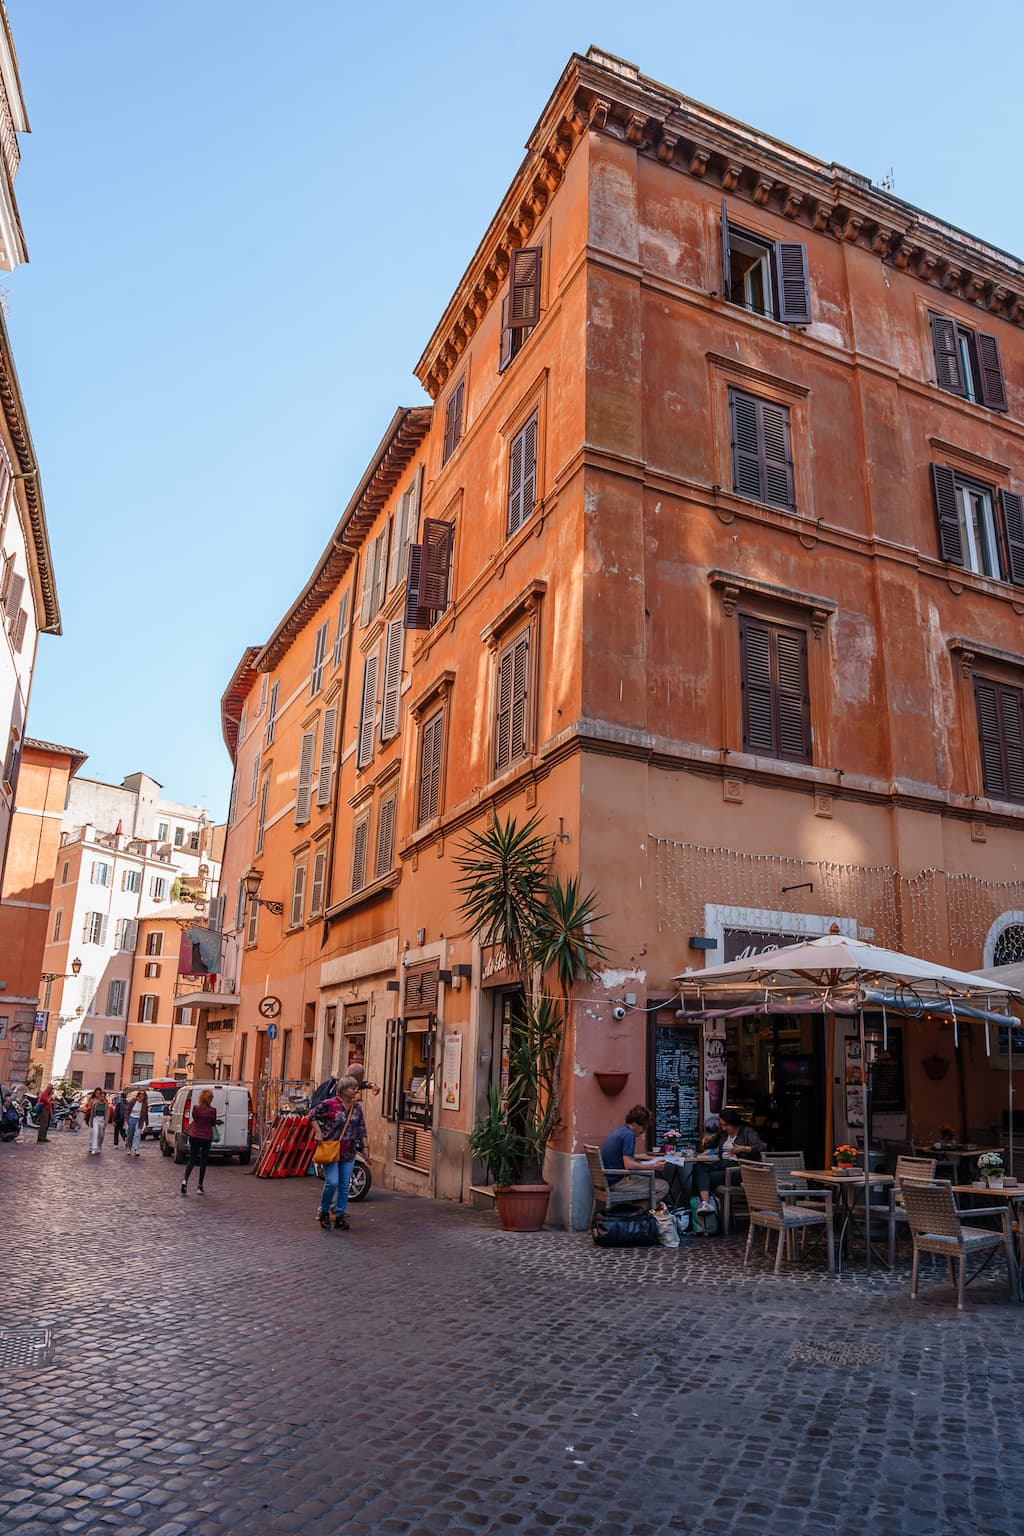 The streets of historic centre of Rome